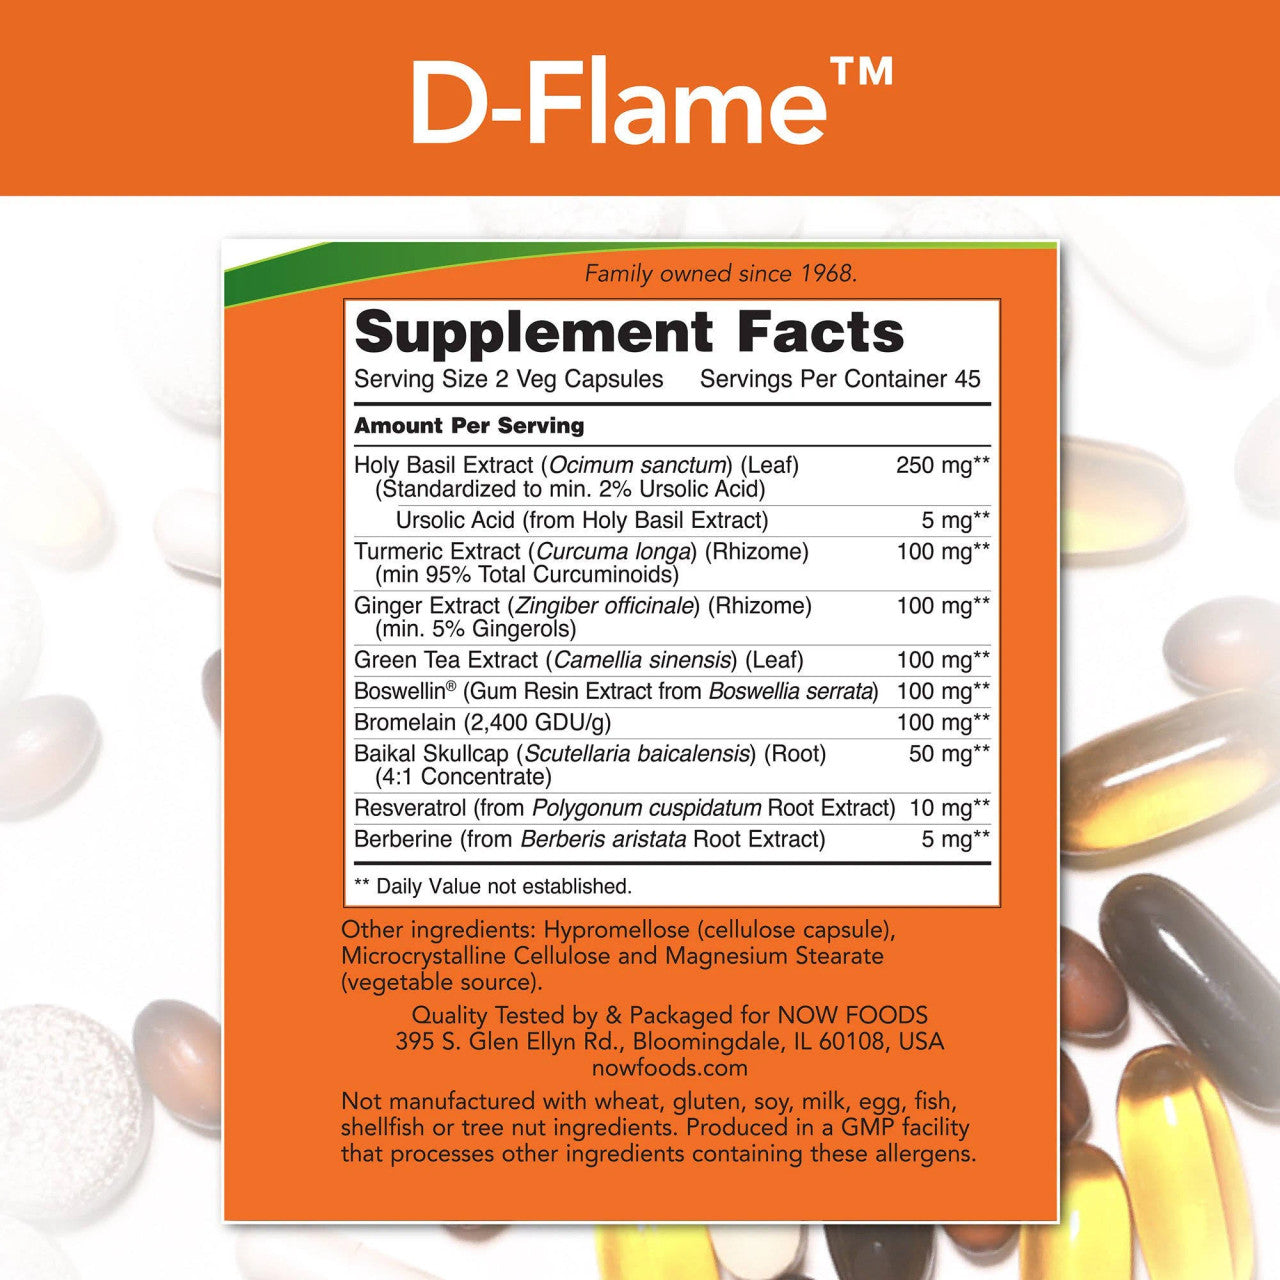 Now D-Flame supplement facts